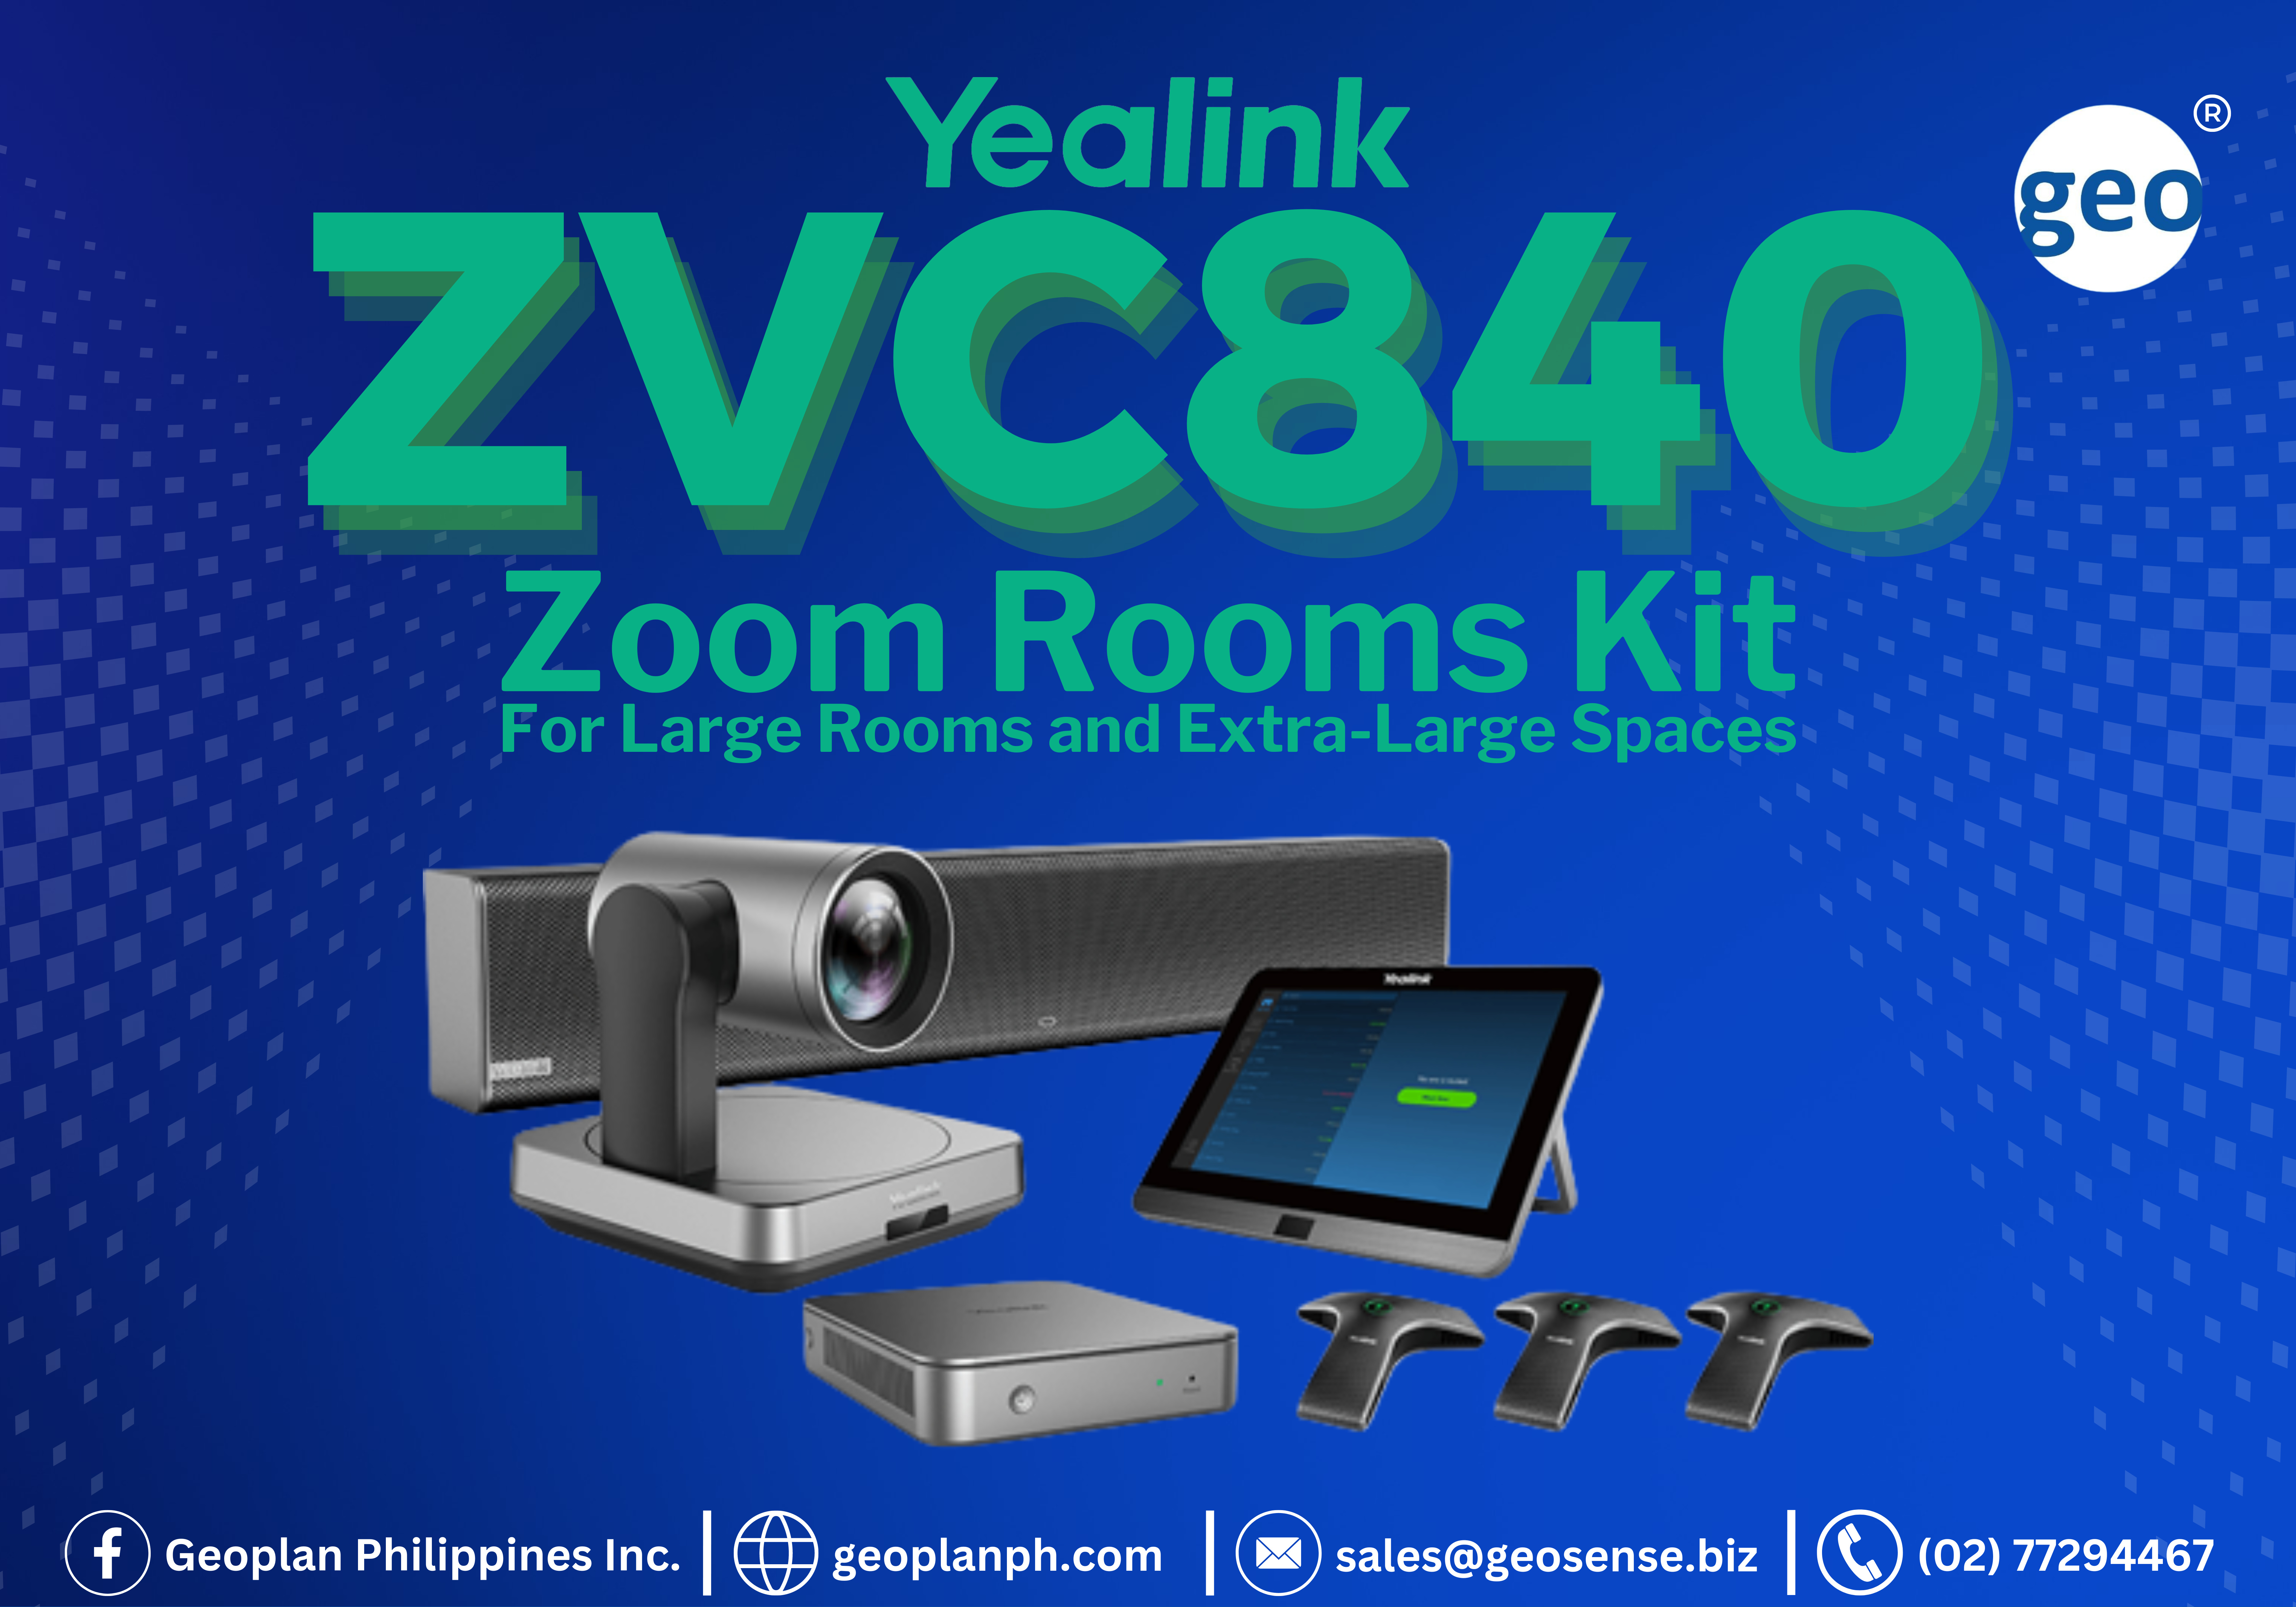 Yealink: Room Conferencing Kit, Your All In One Solution.